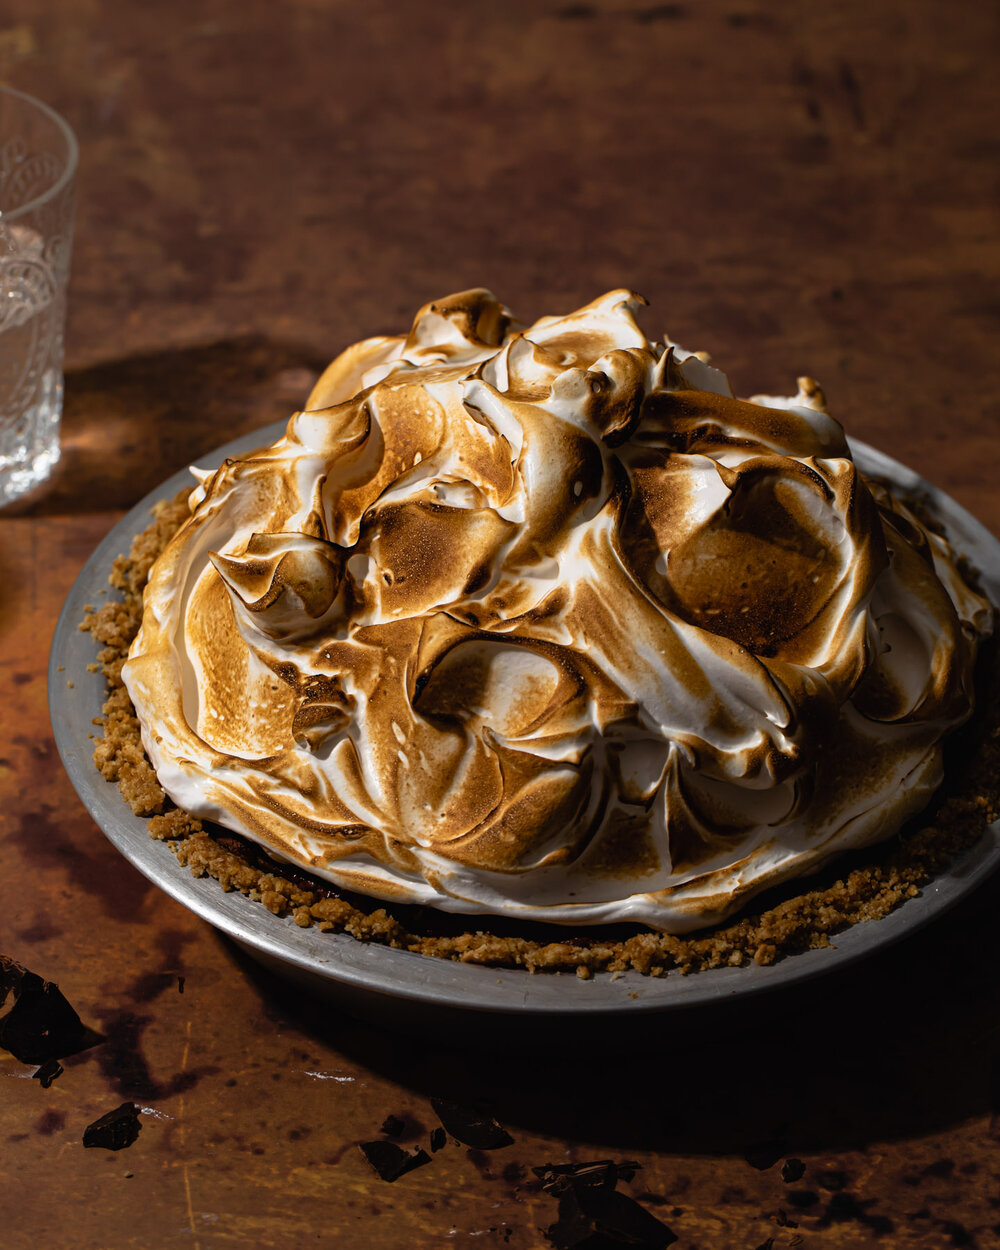 Peanut butter s’mores pie with chocolate peanut butter mousse filling and toasted meringue on top.